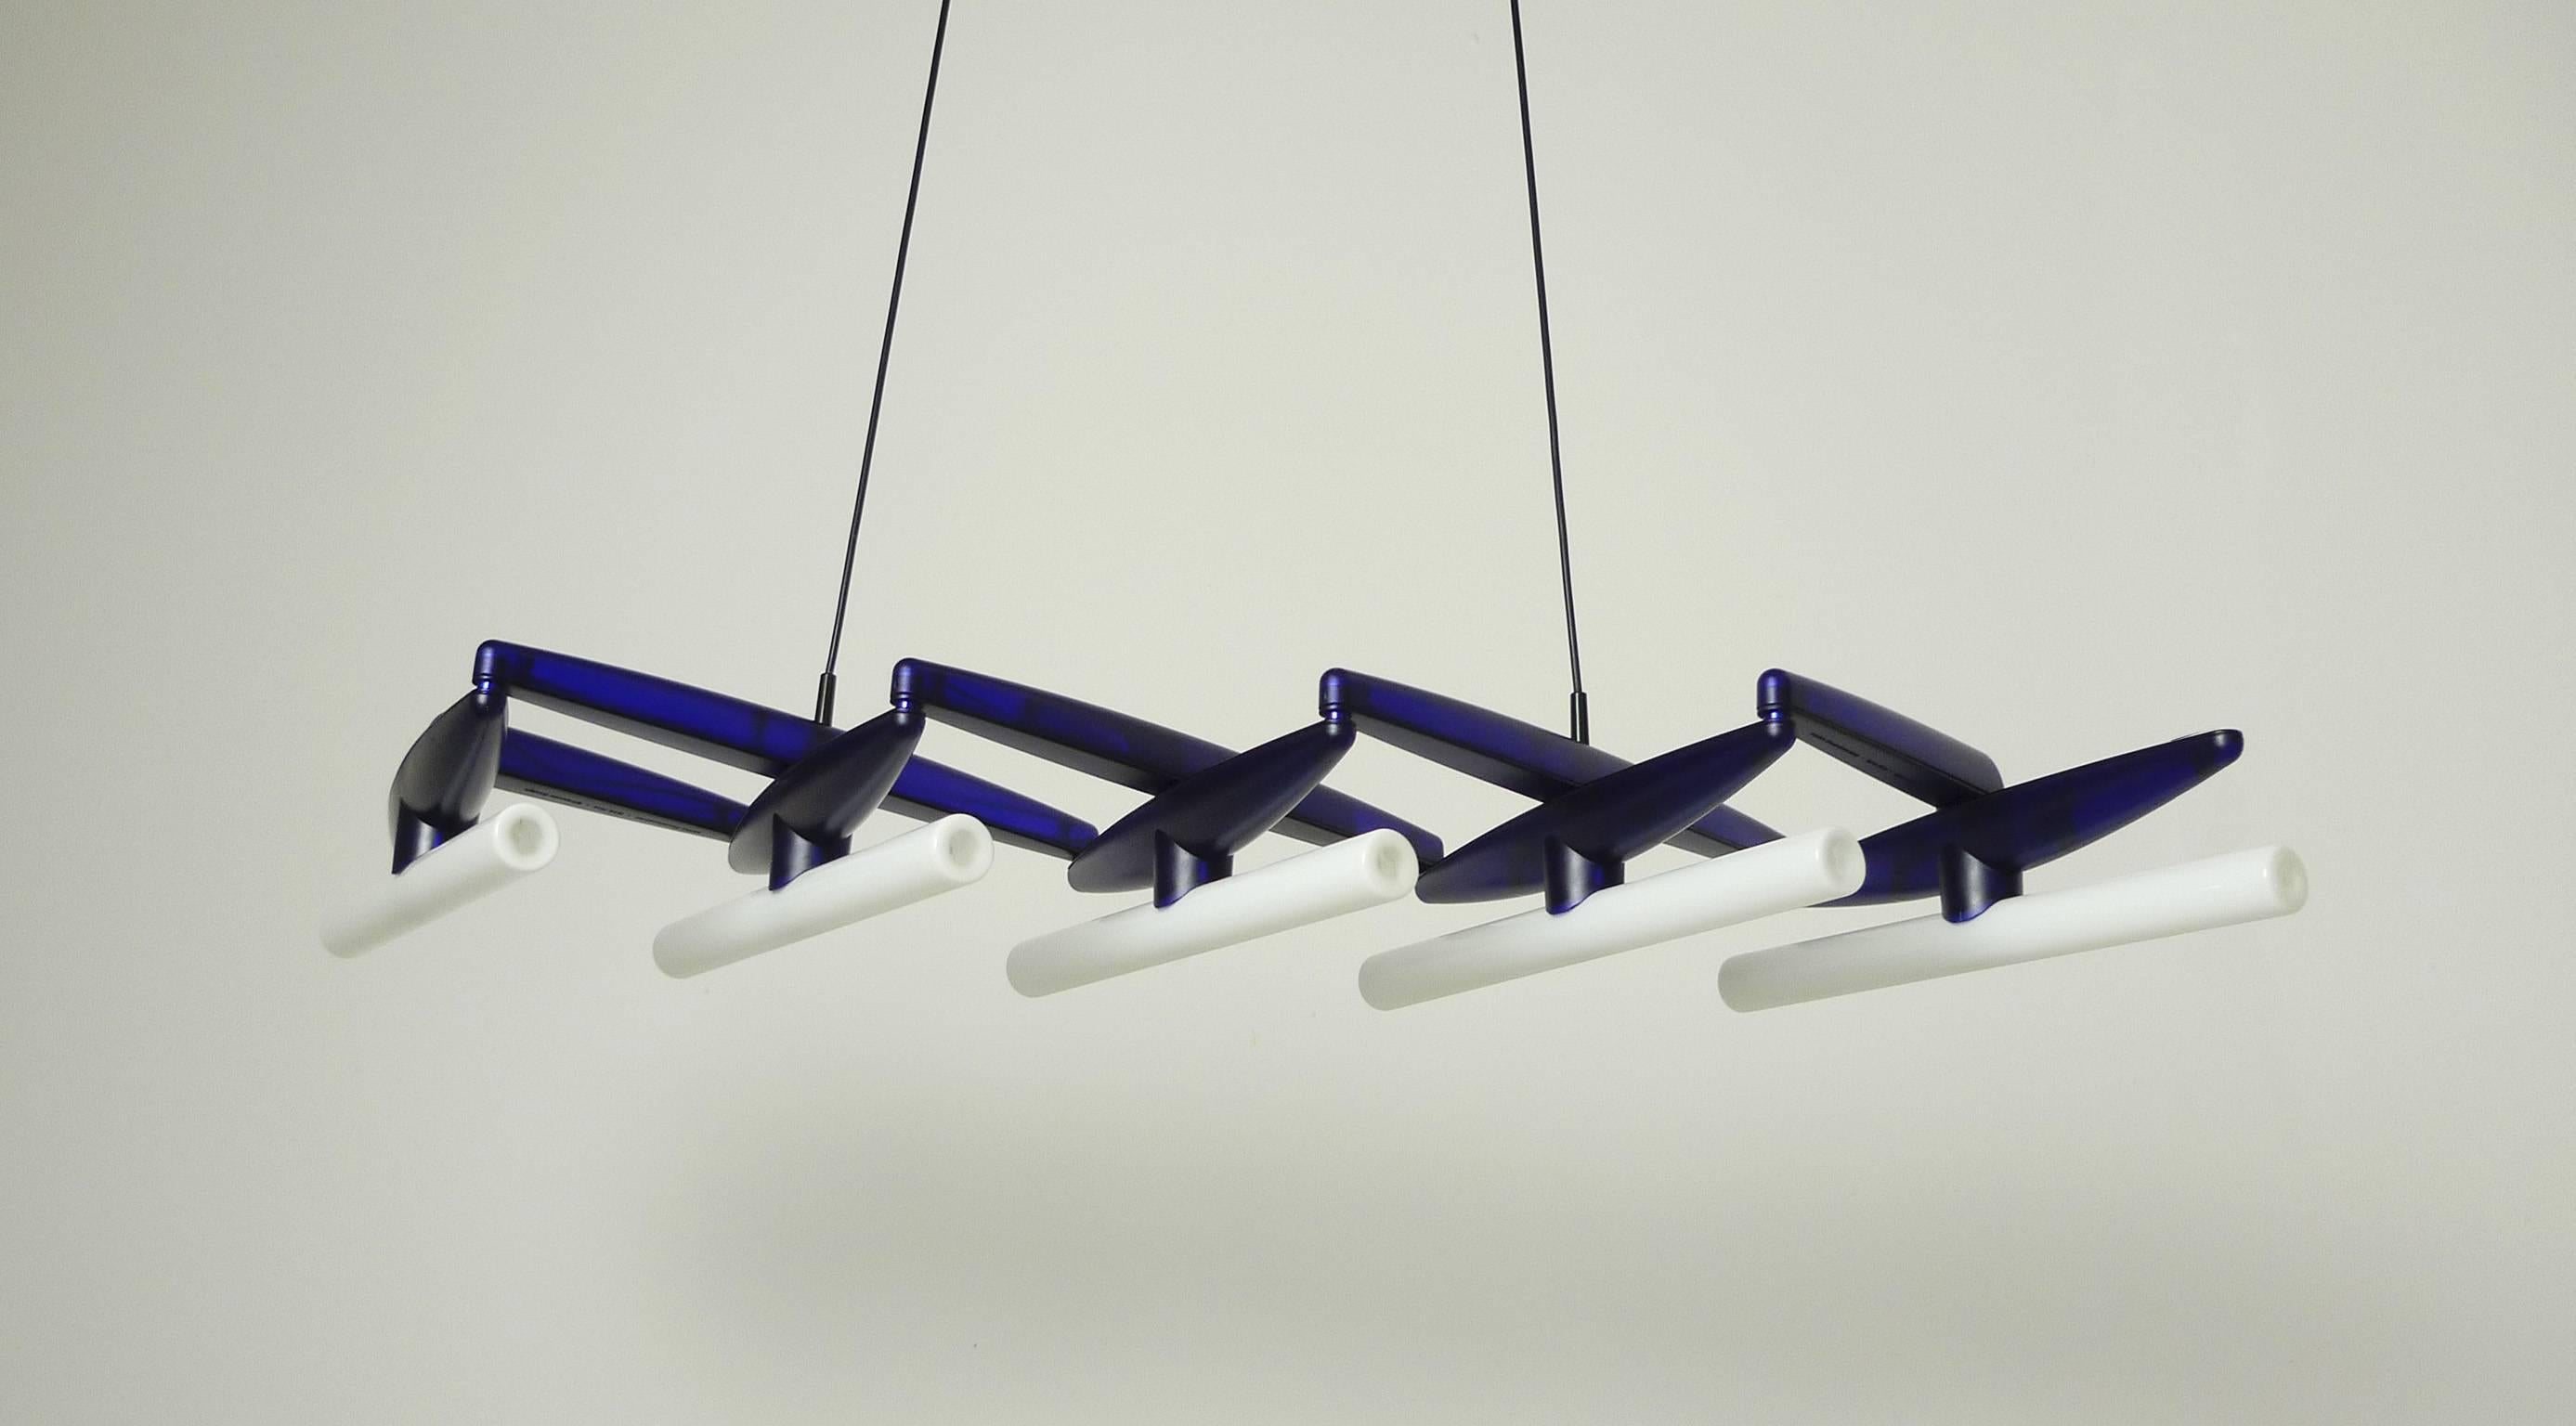 Blue extractable ceiling lamp "Take Five" from the German Design Group Ginbande. They designed it in 1993 for the producer Serien.
This lamp can be extended from the width of only 34 cm up to the maximum of 150 cm. It is made of blue